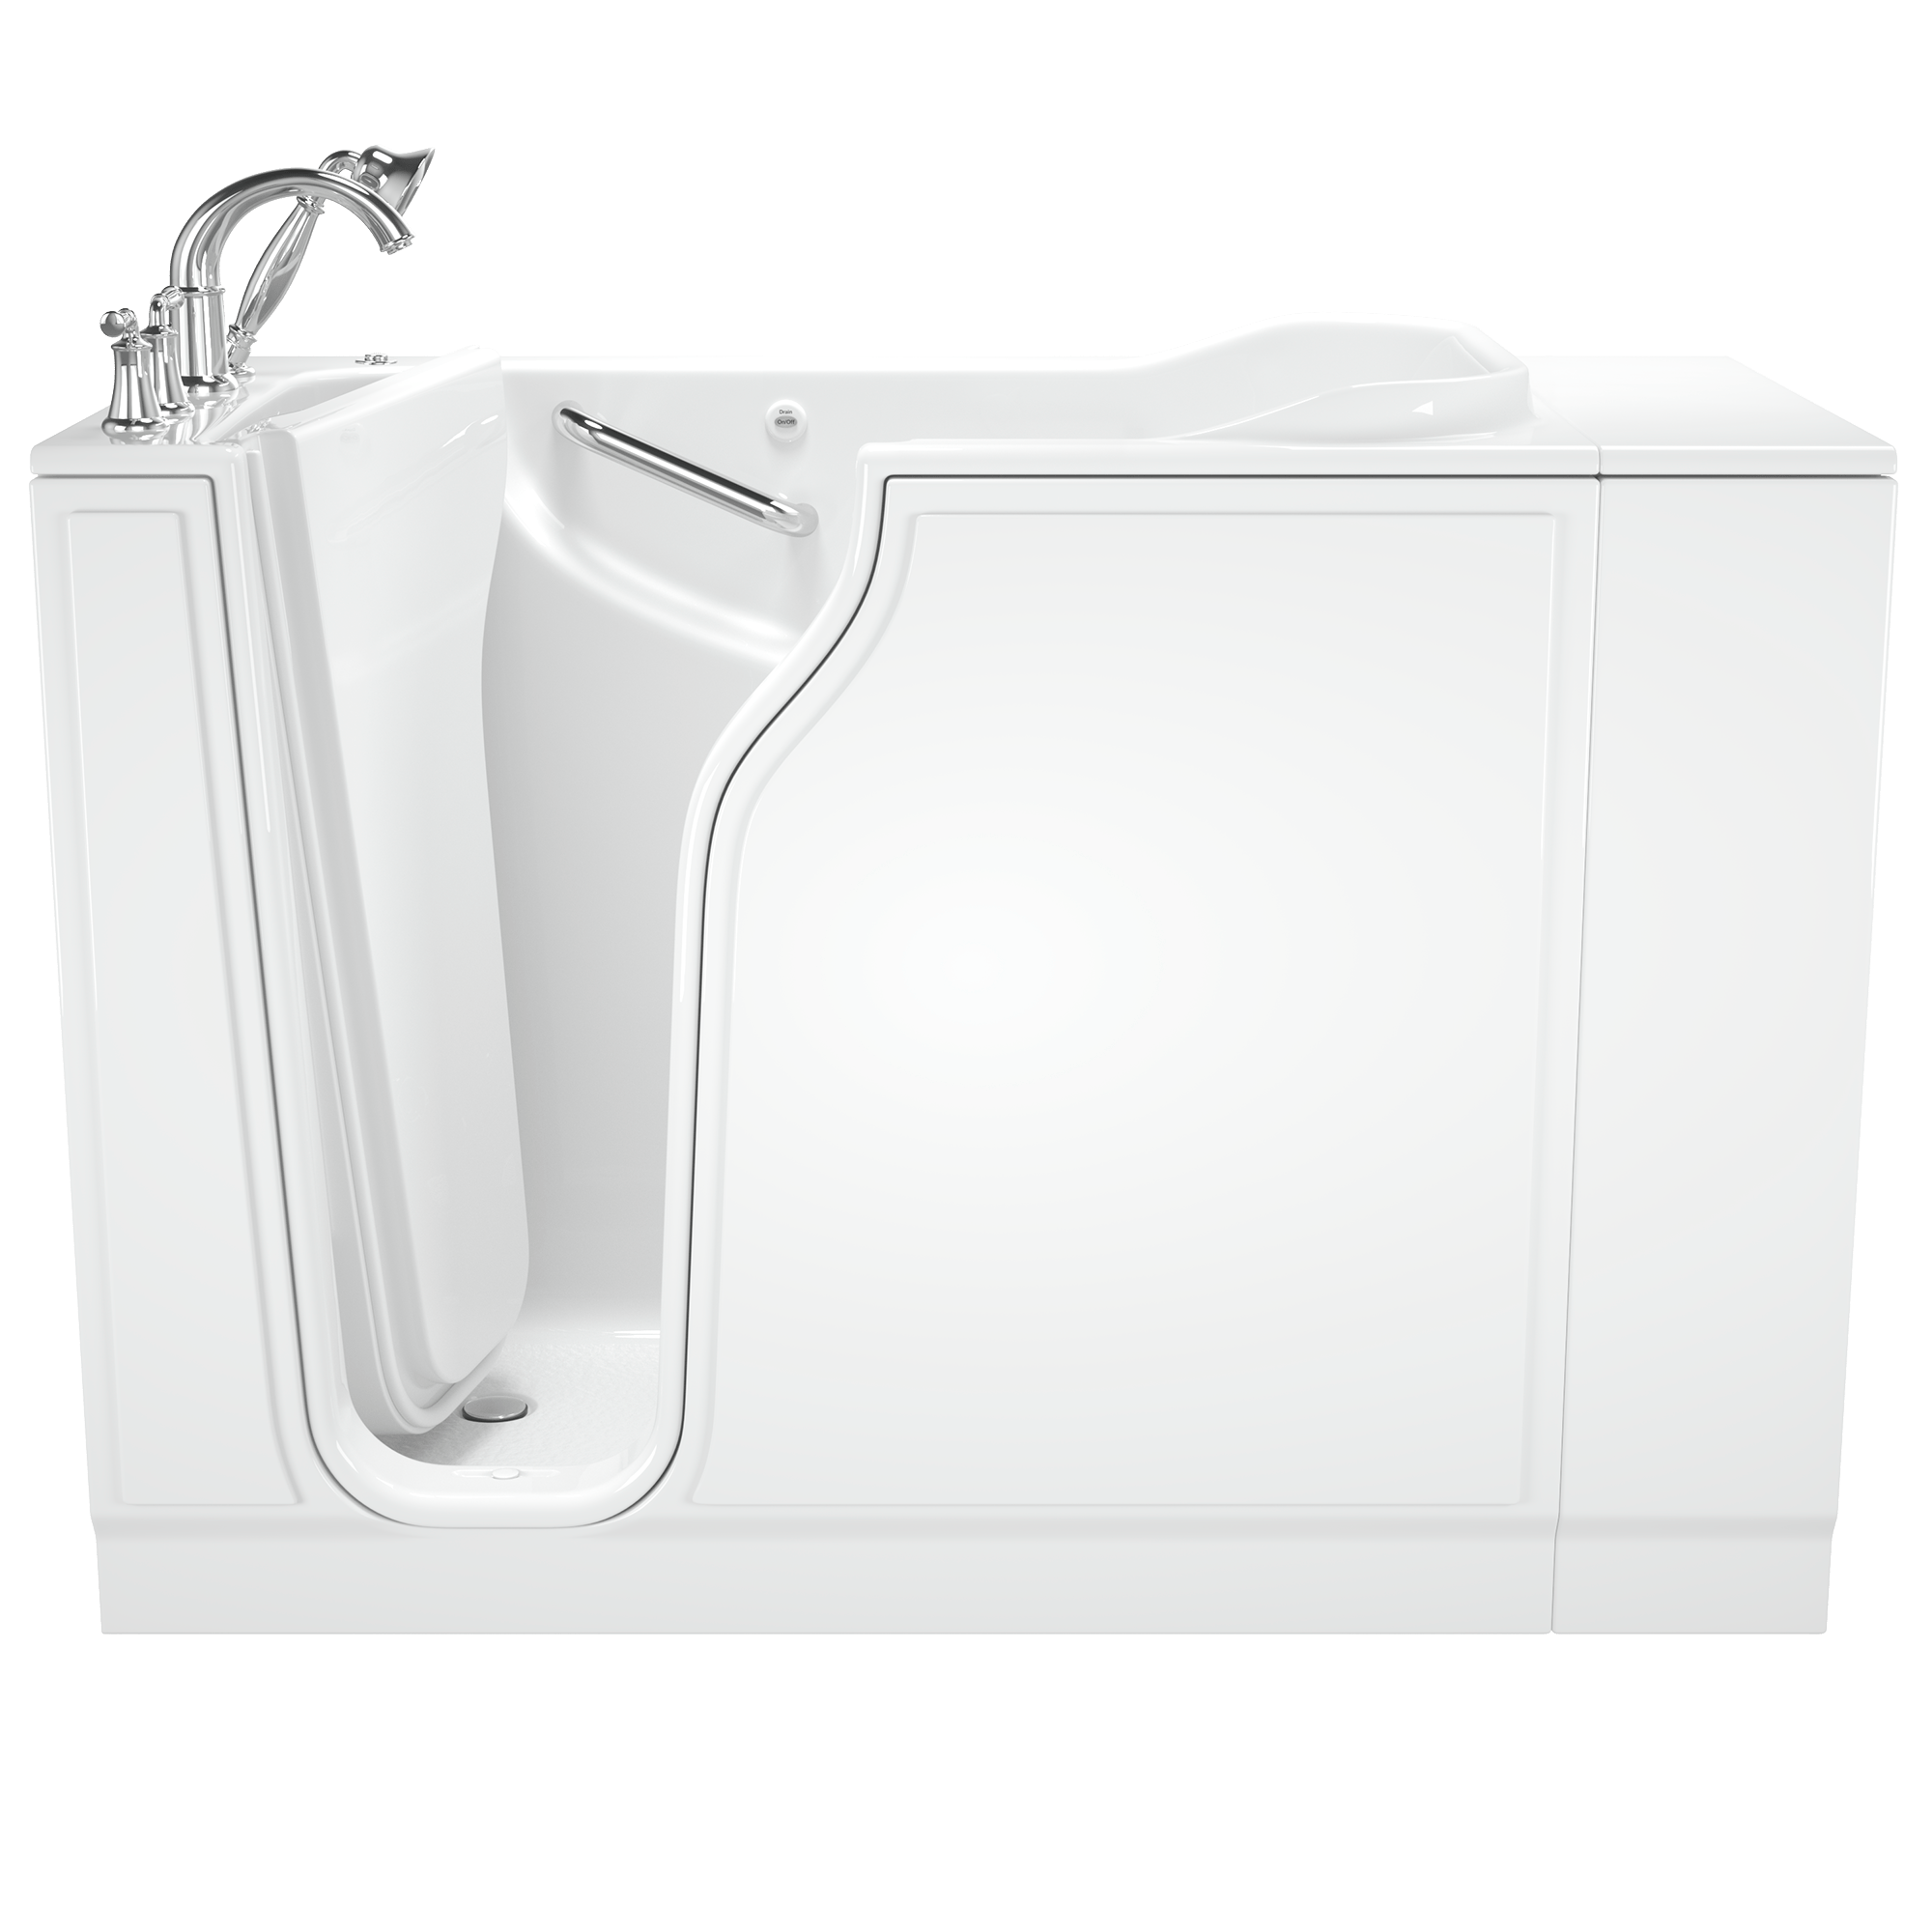 Gelcoat Value Series 30x52 Inch Walk In Bathtub with Air Spa System   Left Hand Door and Drain WIB WHITE